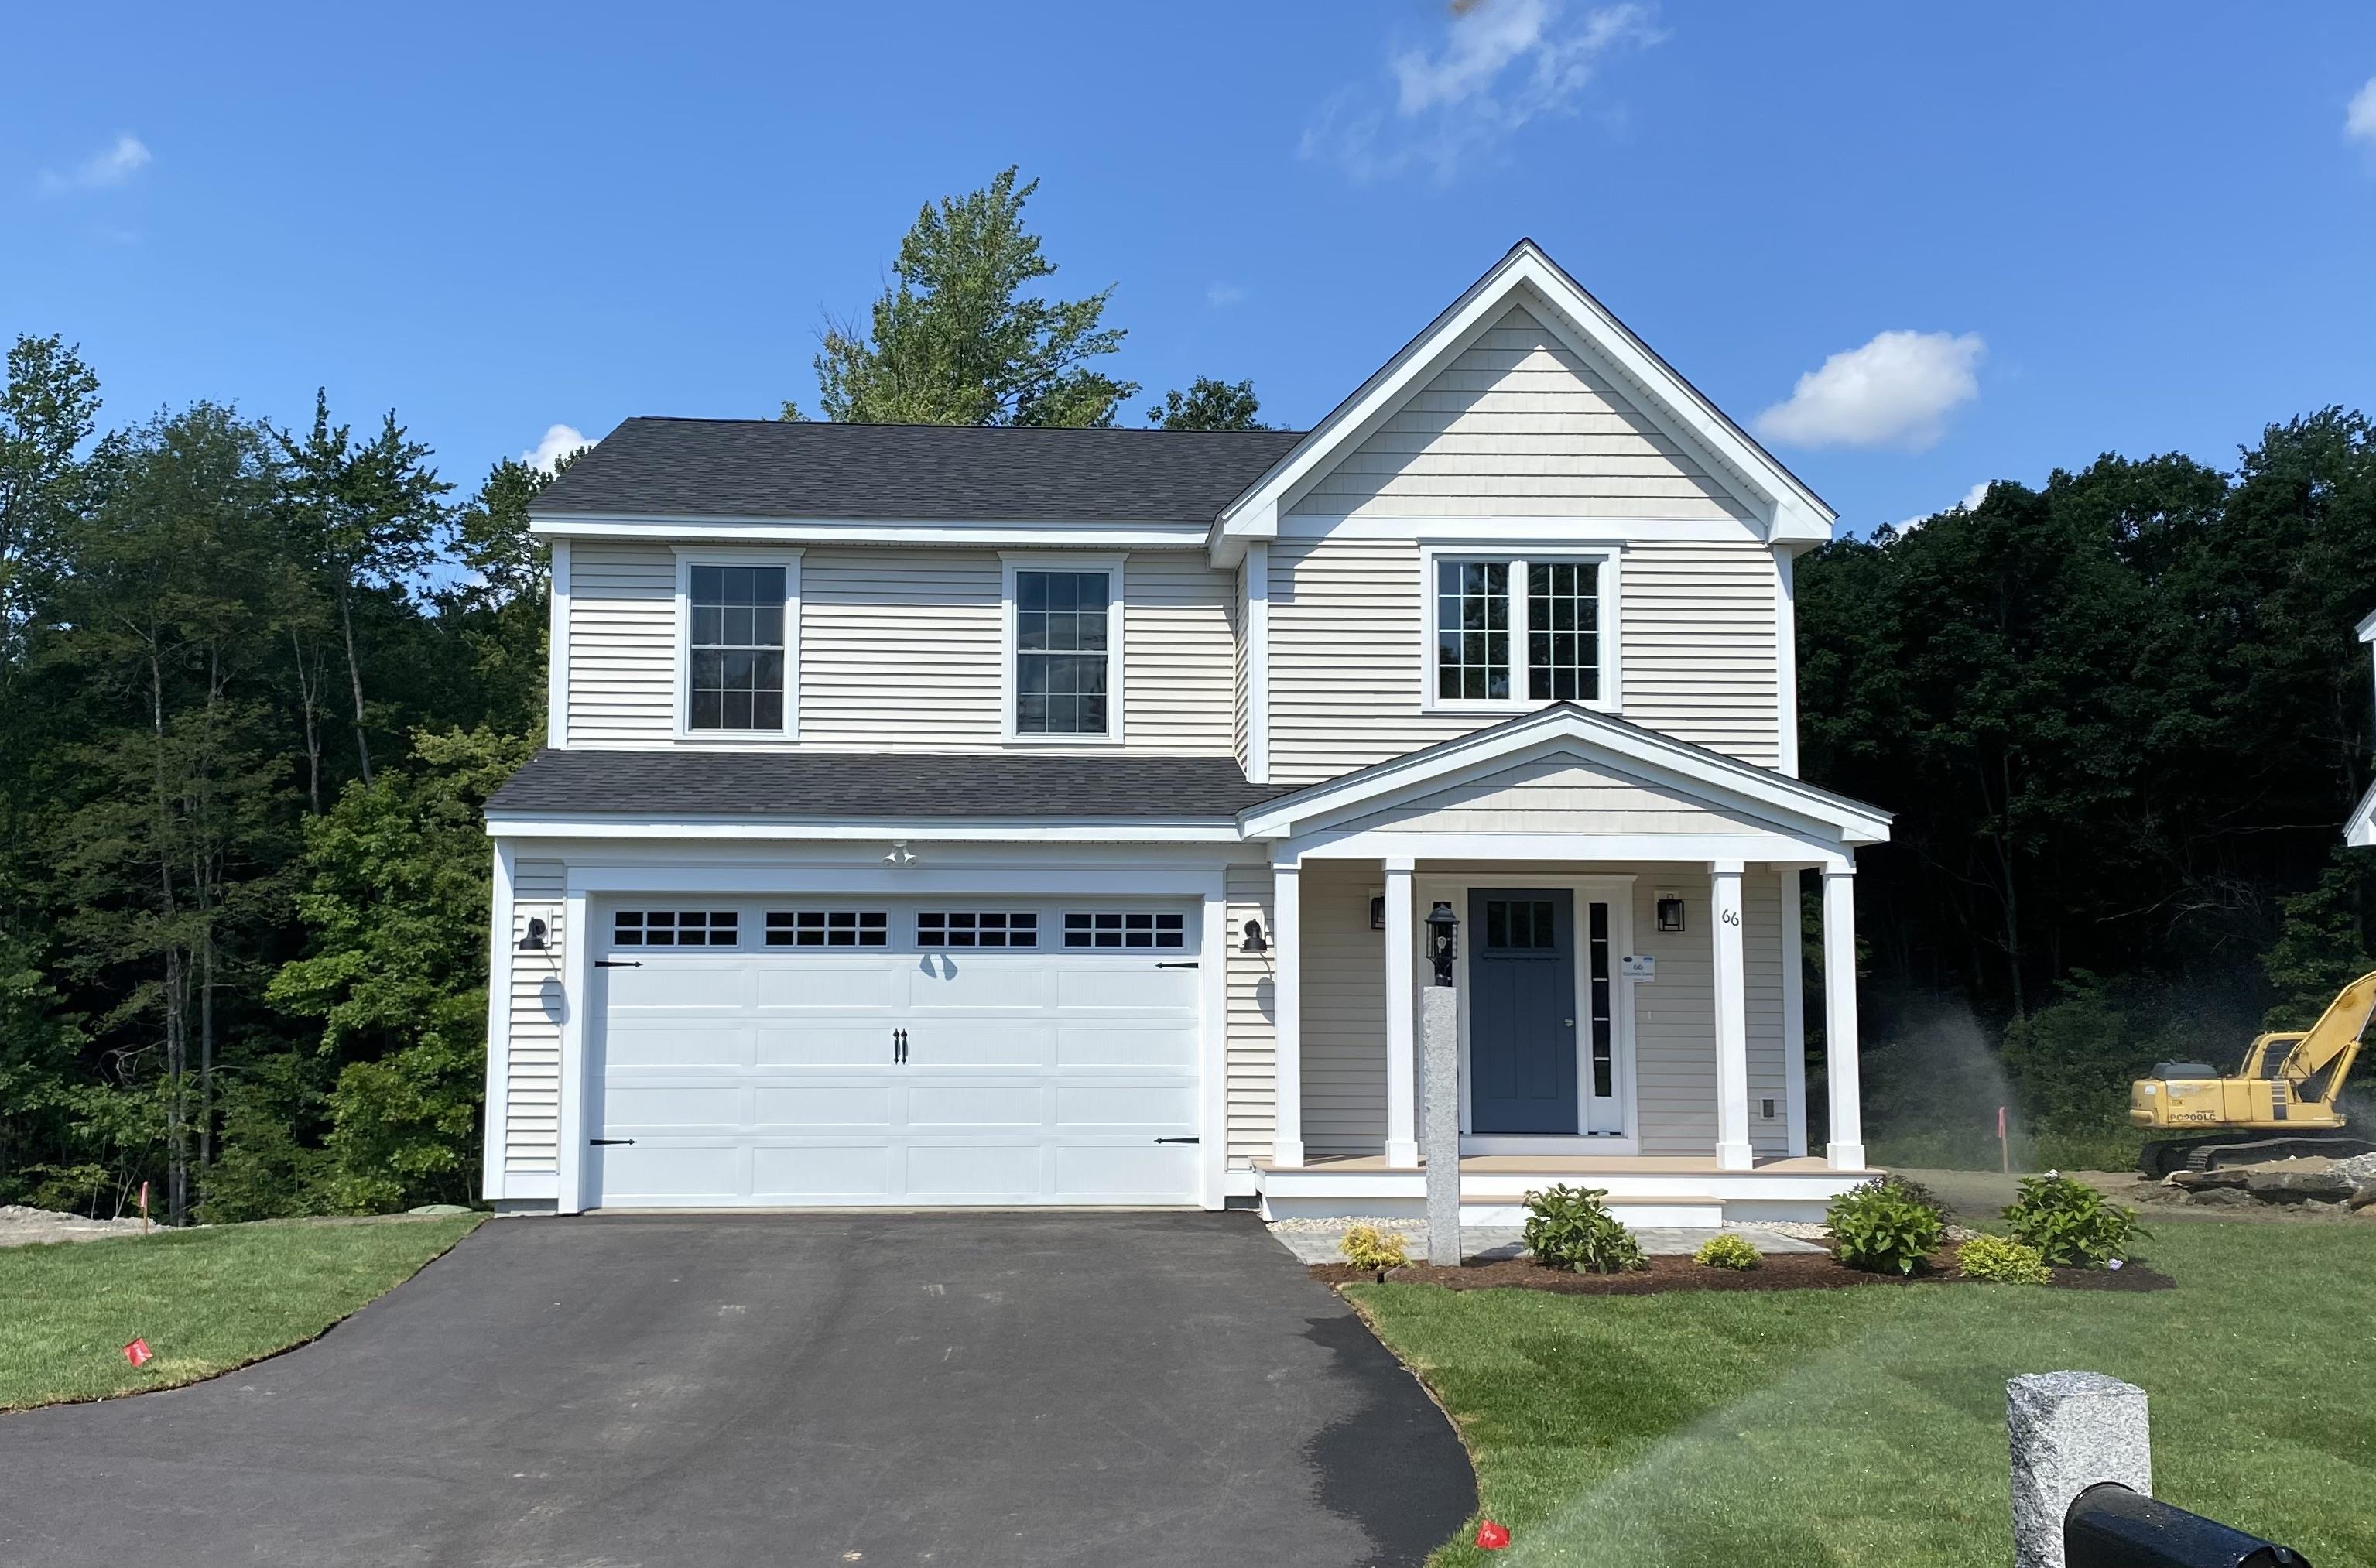 Lot 117 Lorden Commons Lot 117, Londonderry, NH 03053